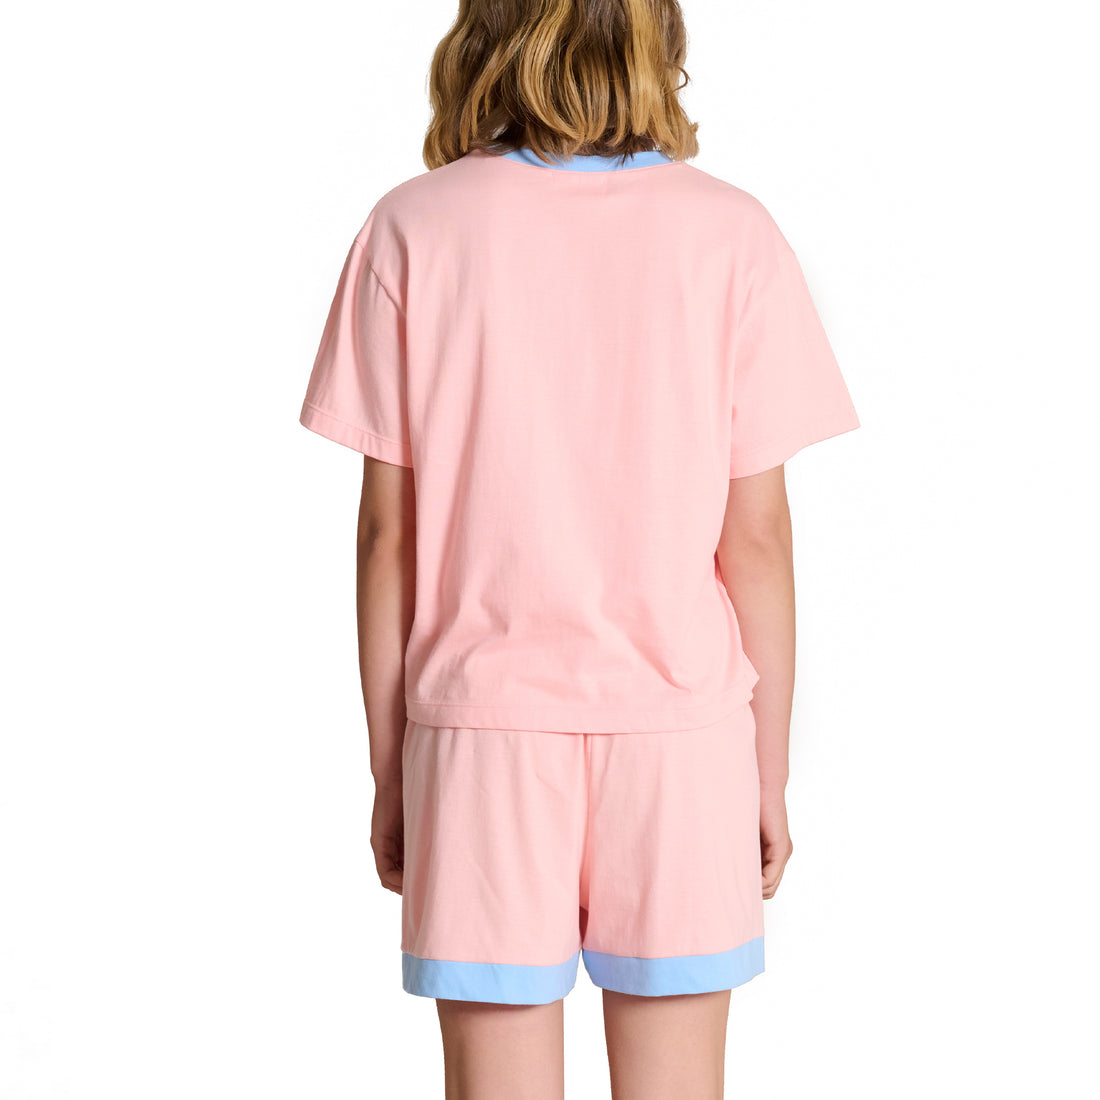 Wacoal x Fluffy Omelet All-Day Comfy Short Sleeve T-shirt and Shorts Set Model WN9D04 Orange (OR)